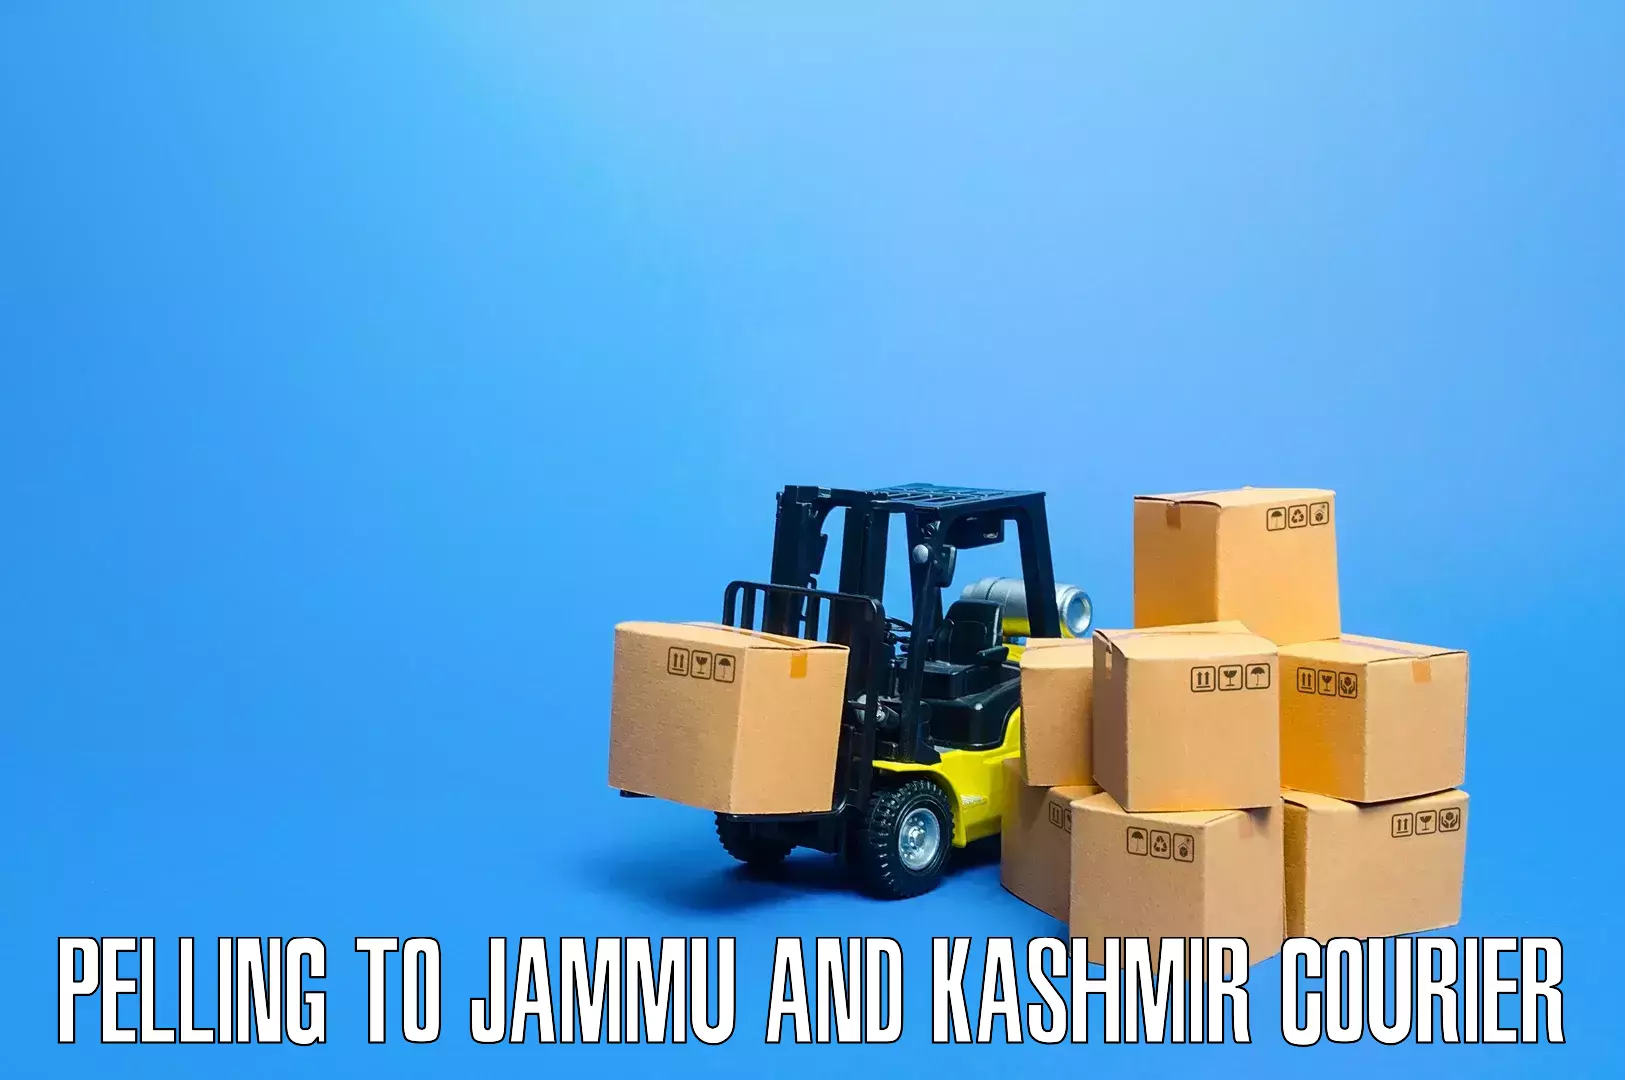 Furniture moving experts Pelling to Udhampur